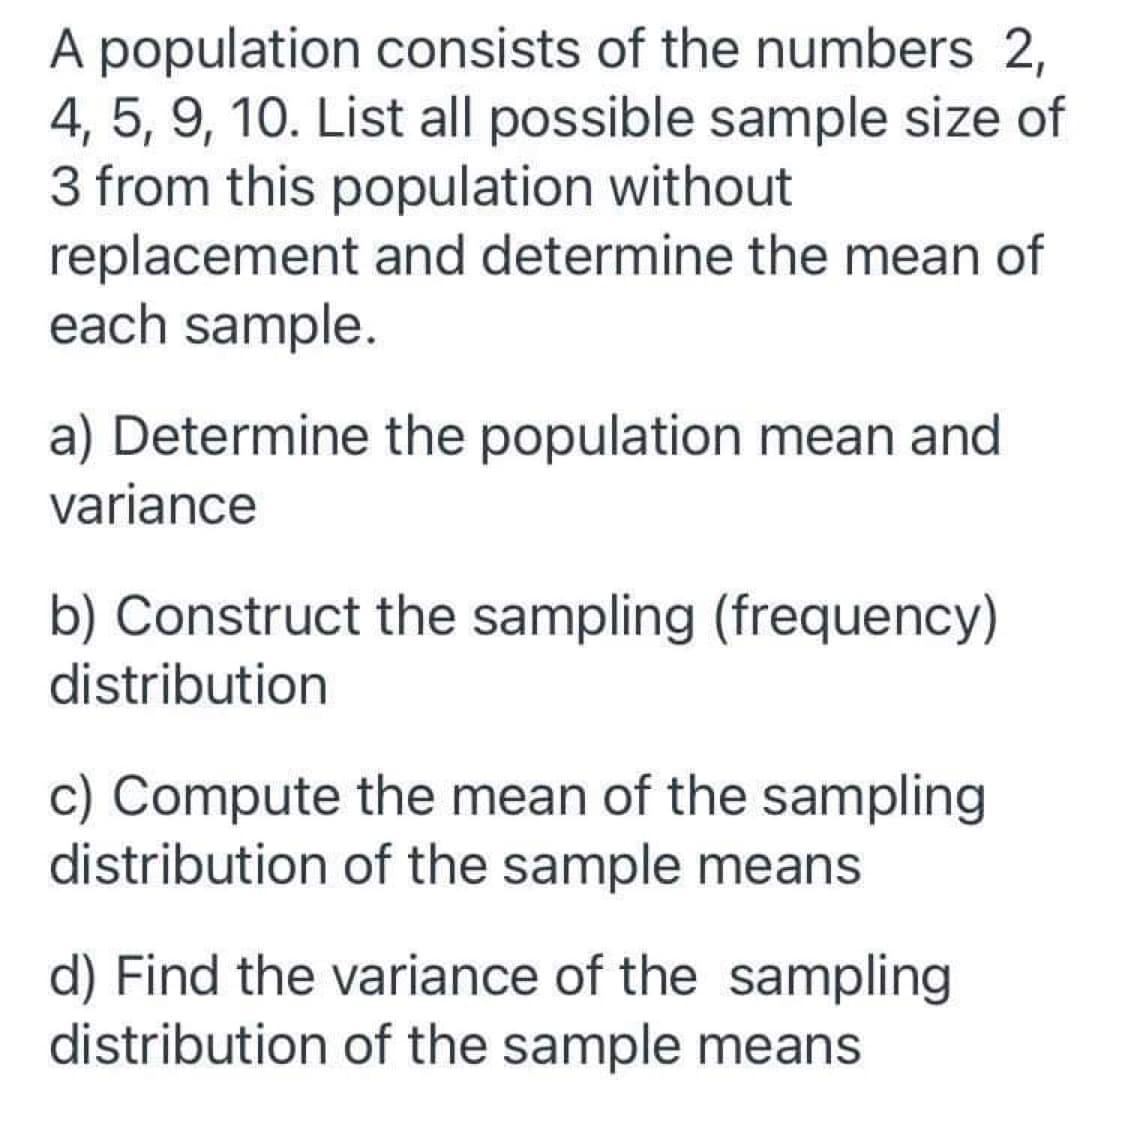 A population consists of the numbers 2,
4, 5, 9, 10. List all possible sample size of
3 from this population without
replacement and determine the mean of
each sample.
a) Determine the population mean and
variance
b) Construct the sampling (frequency)
distribution
c) Compute the mean of the sampling
distribution of the sample means
d) Find the variance of the sampling
distribution of the sample means
